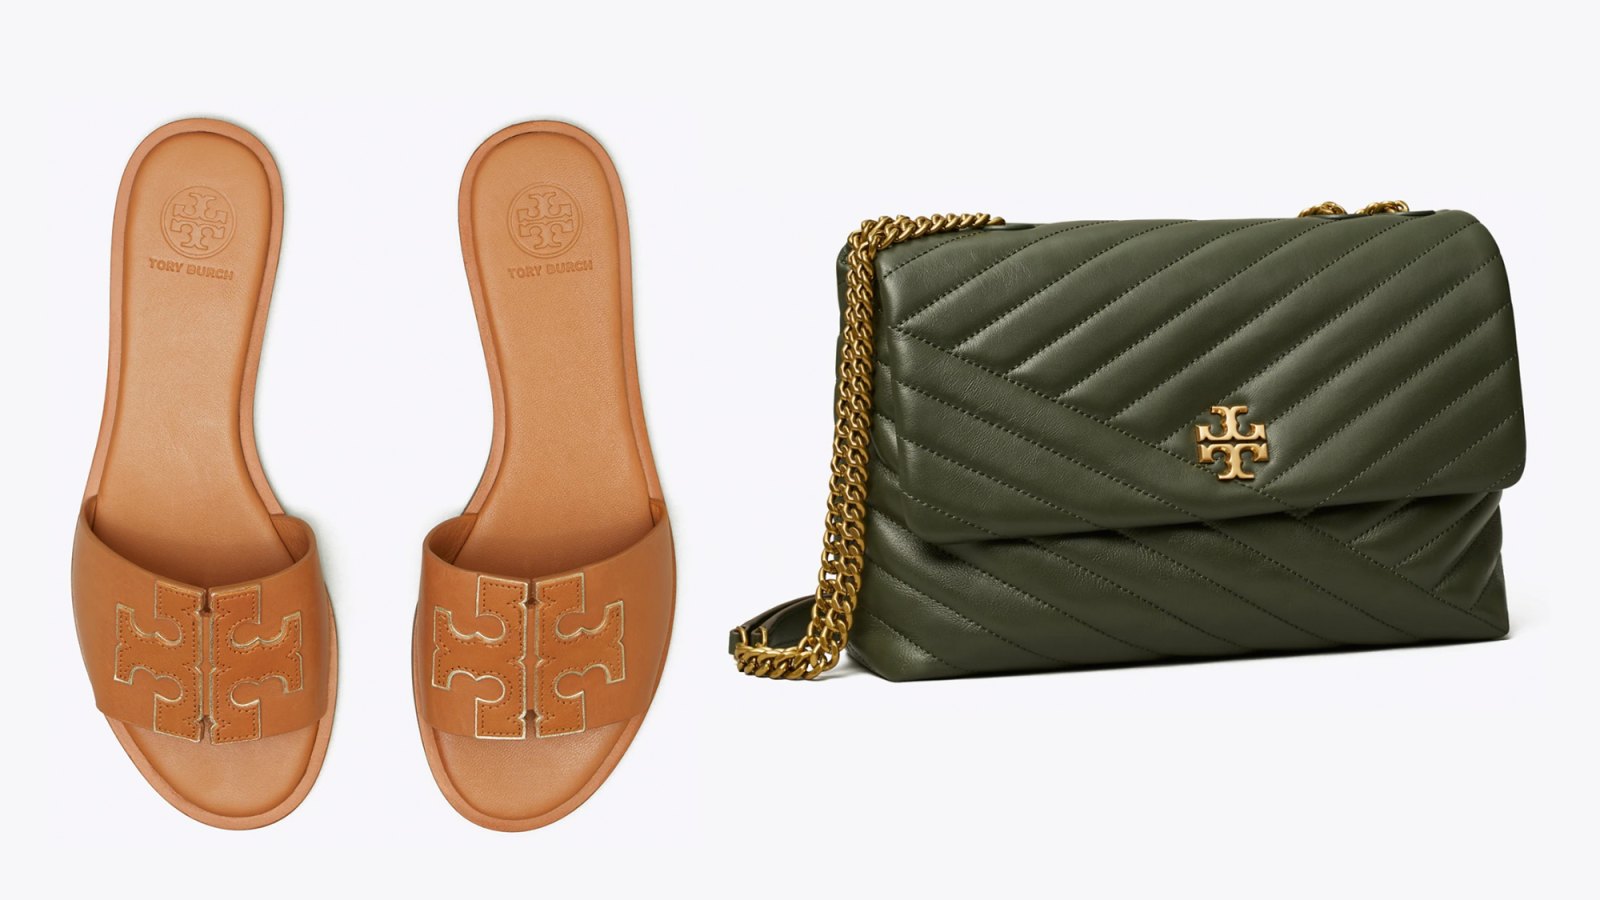 Tory Burch Just Marked Down Tons of Spring Items — Our Top Picks